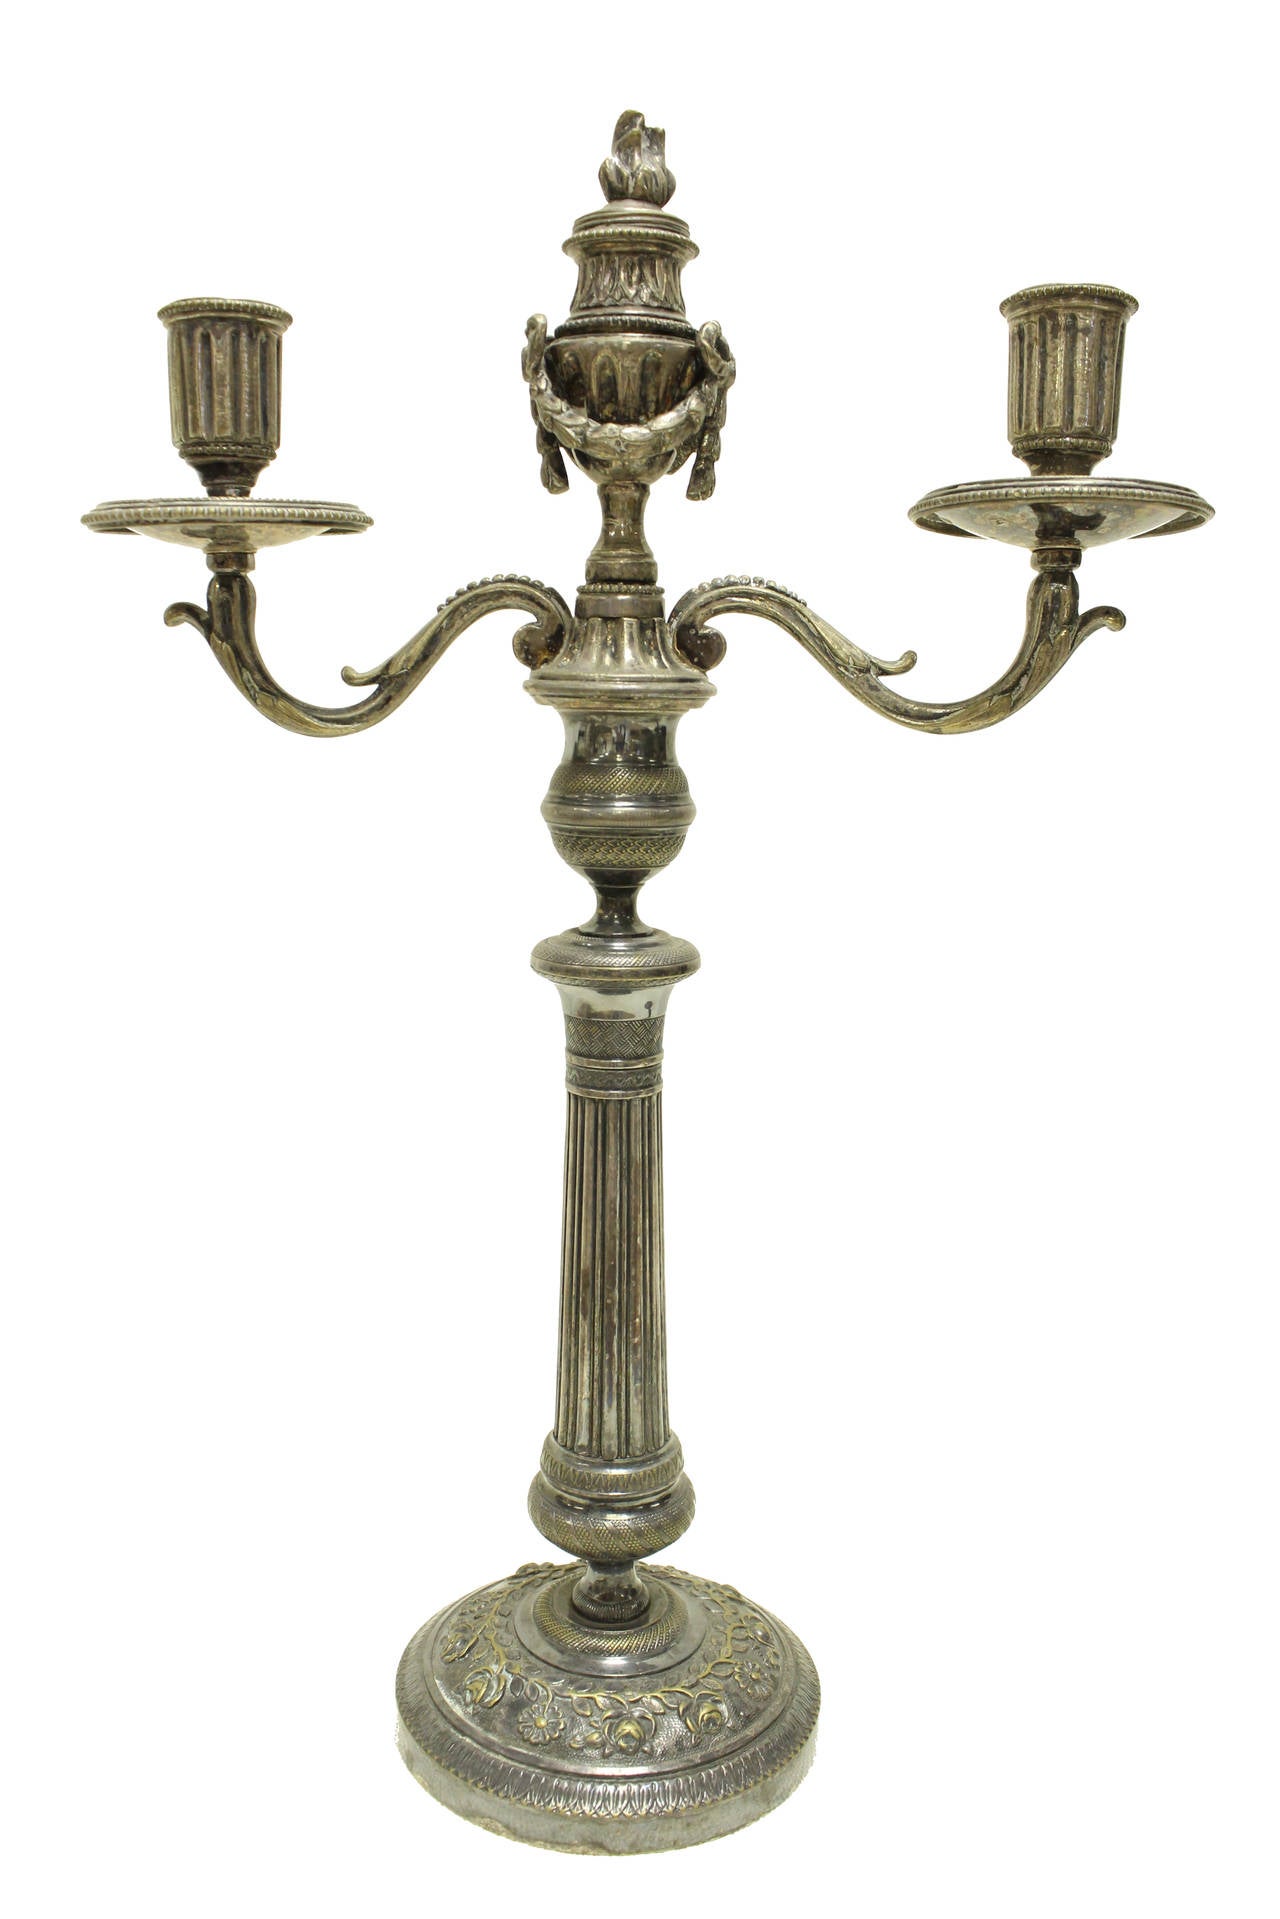 19c FrenchLouis XVI Silver-Plated Pair of Candelabras 1